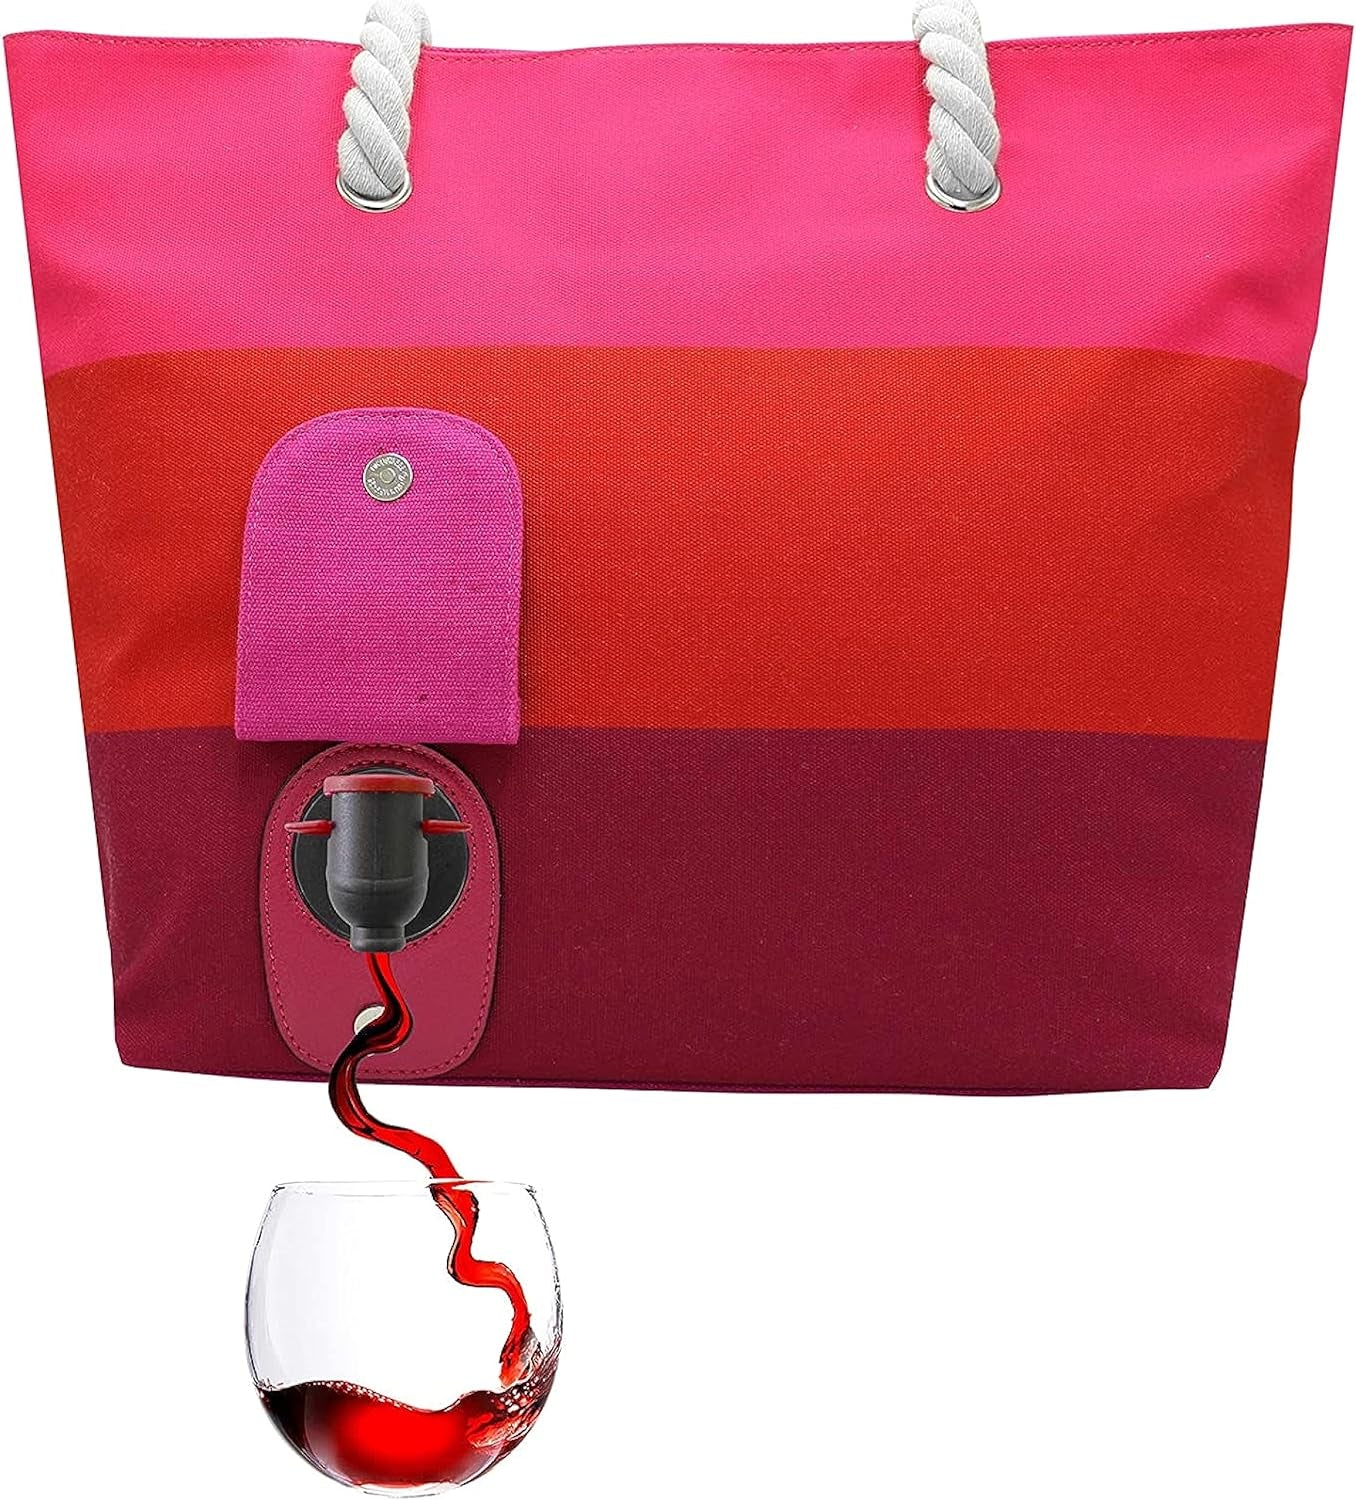 Tote Beach Bag - Canvas Wine Purse with Hidden Spout and Dispenser Flask for Wine Lovers That Holds and Pours 2 Bottles of Wine! Traveling, Concerts, Bachelorette Party - Sangria